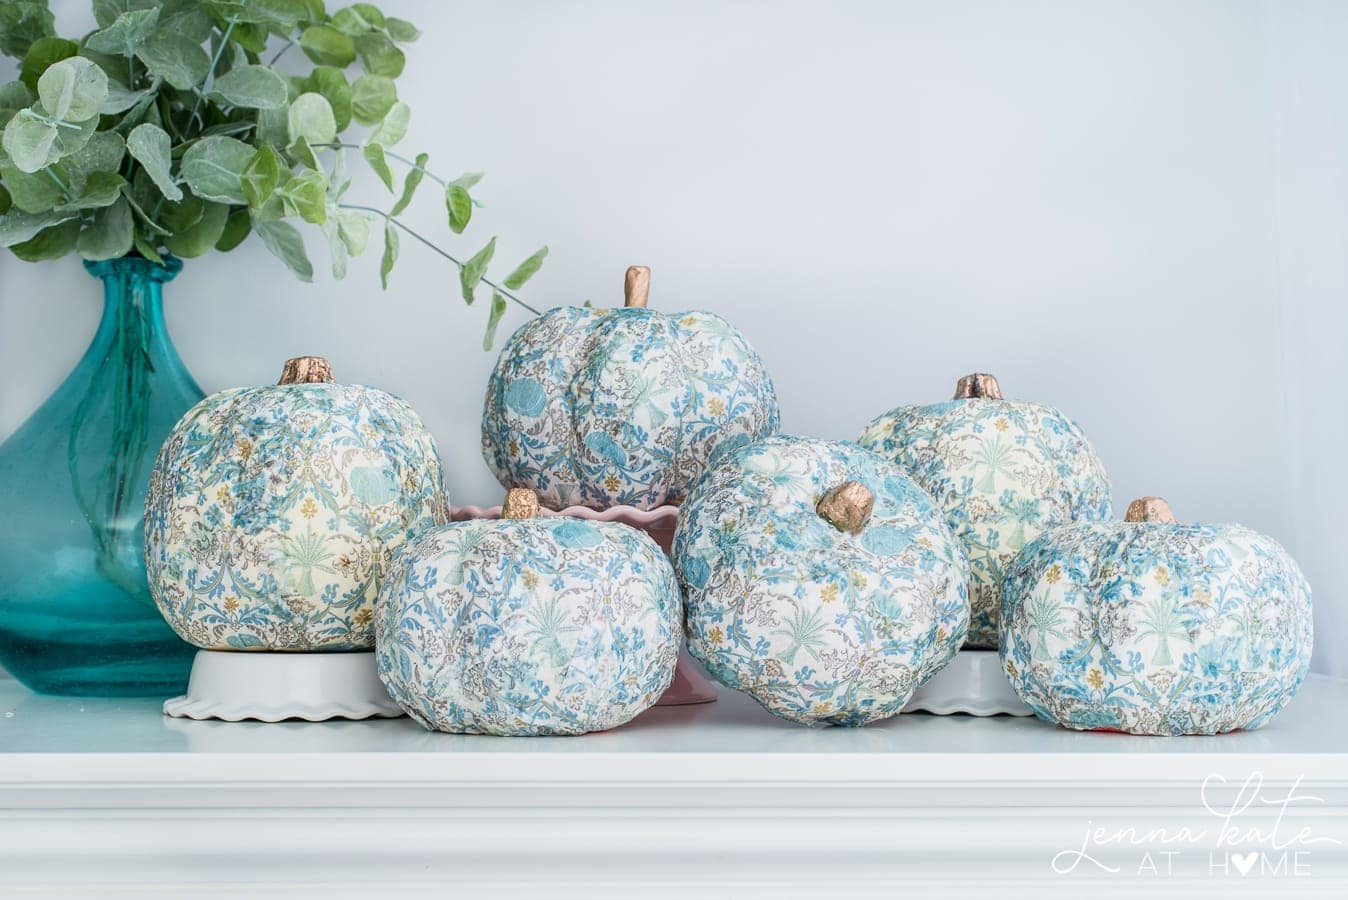 A collection of completed mod podge pumpkins resting on a table with a vase full of greenery.